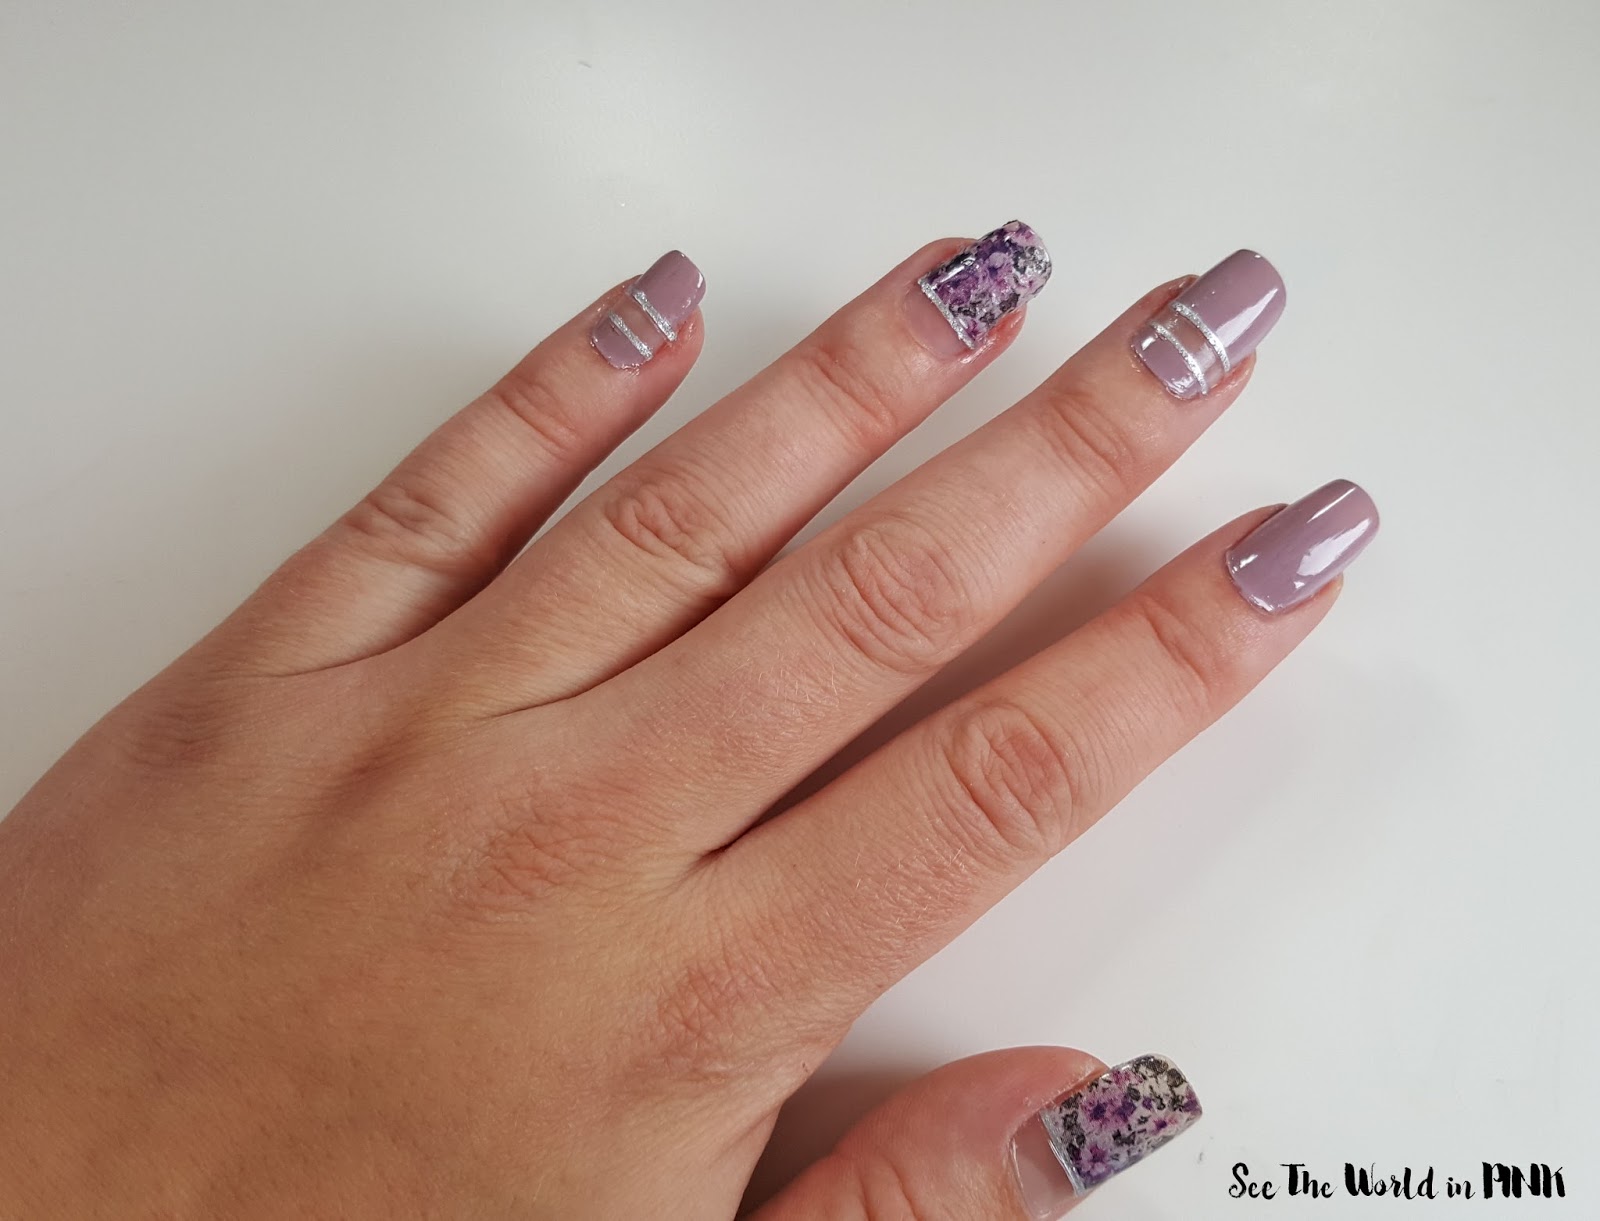 Manicure Monday - Negative Space Manicure with Nail Hugs Appliques (with a quick review!)